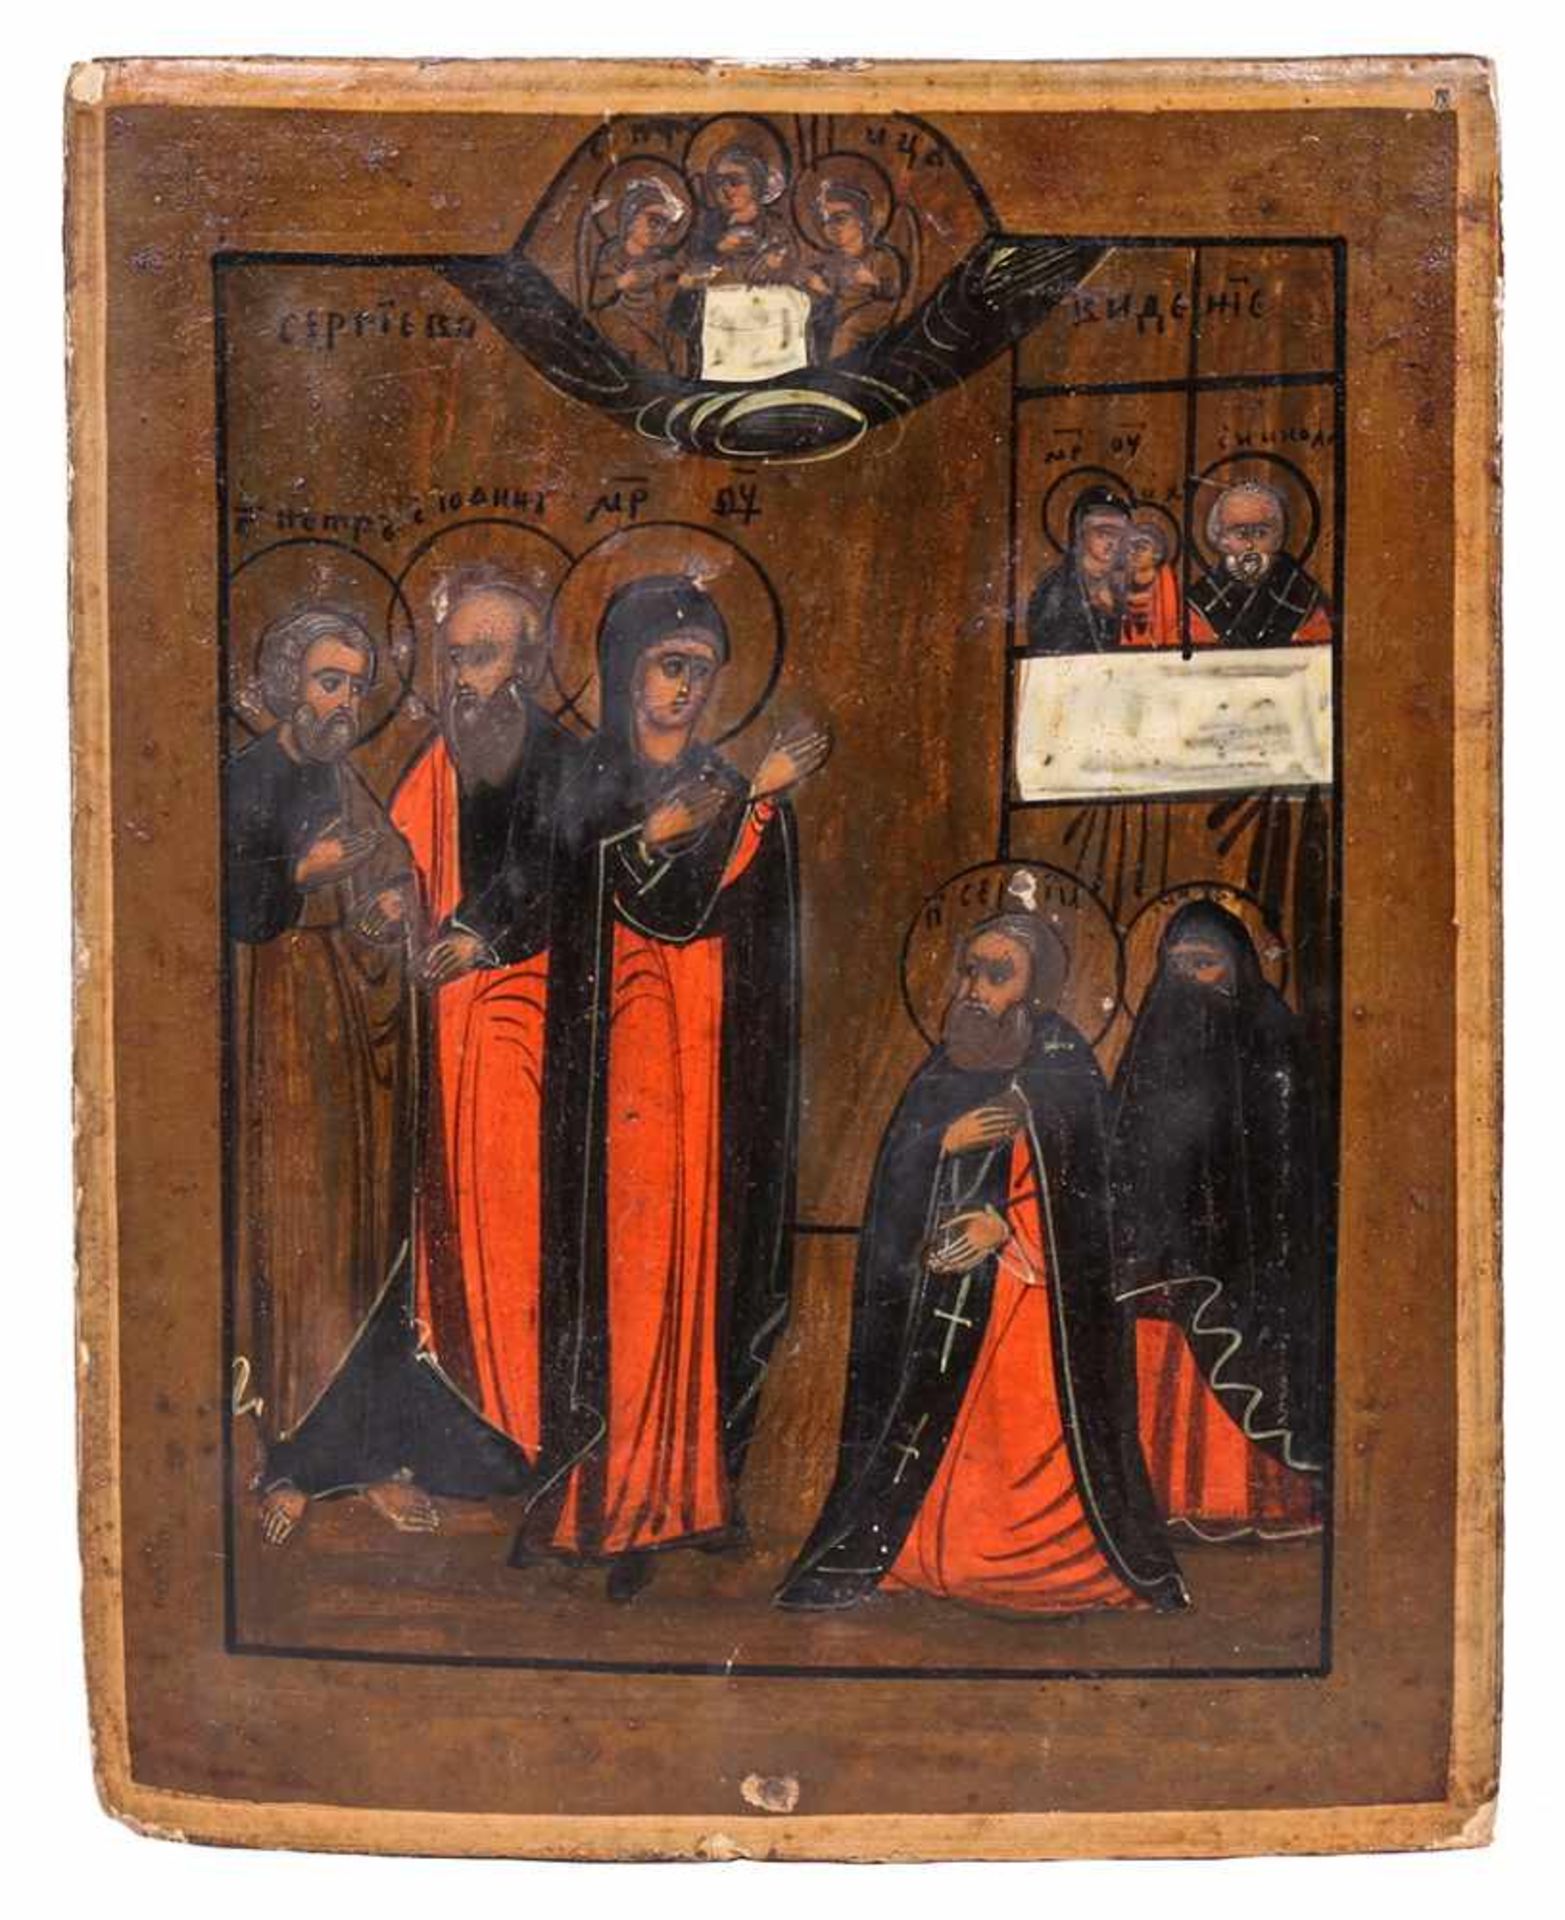 Russian icon "The Appearance of Mother of God to St. Sergey of Radonezh". - 19th century. - 28x22